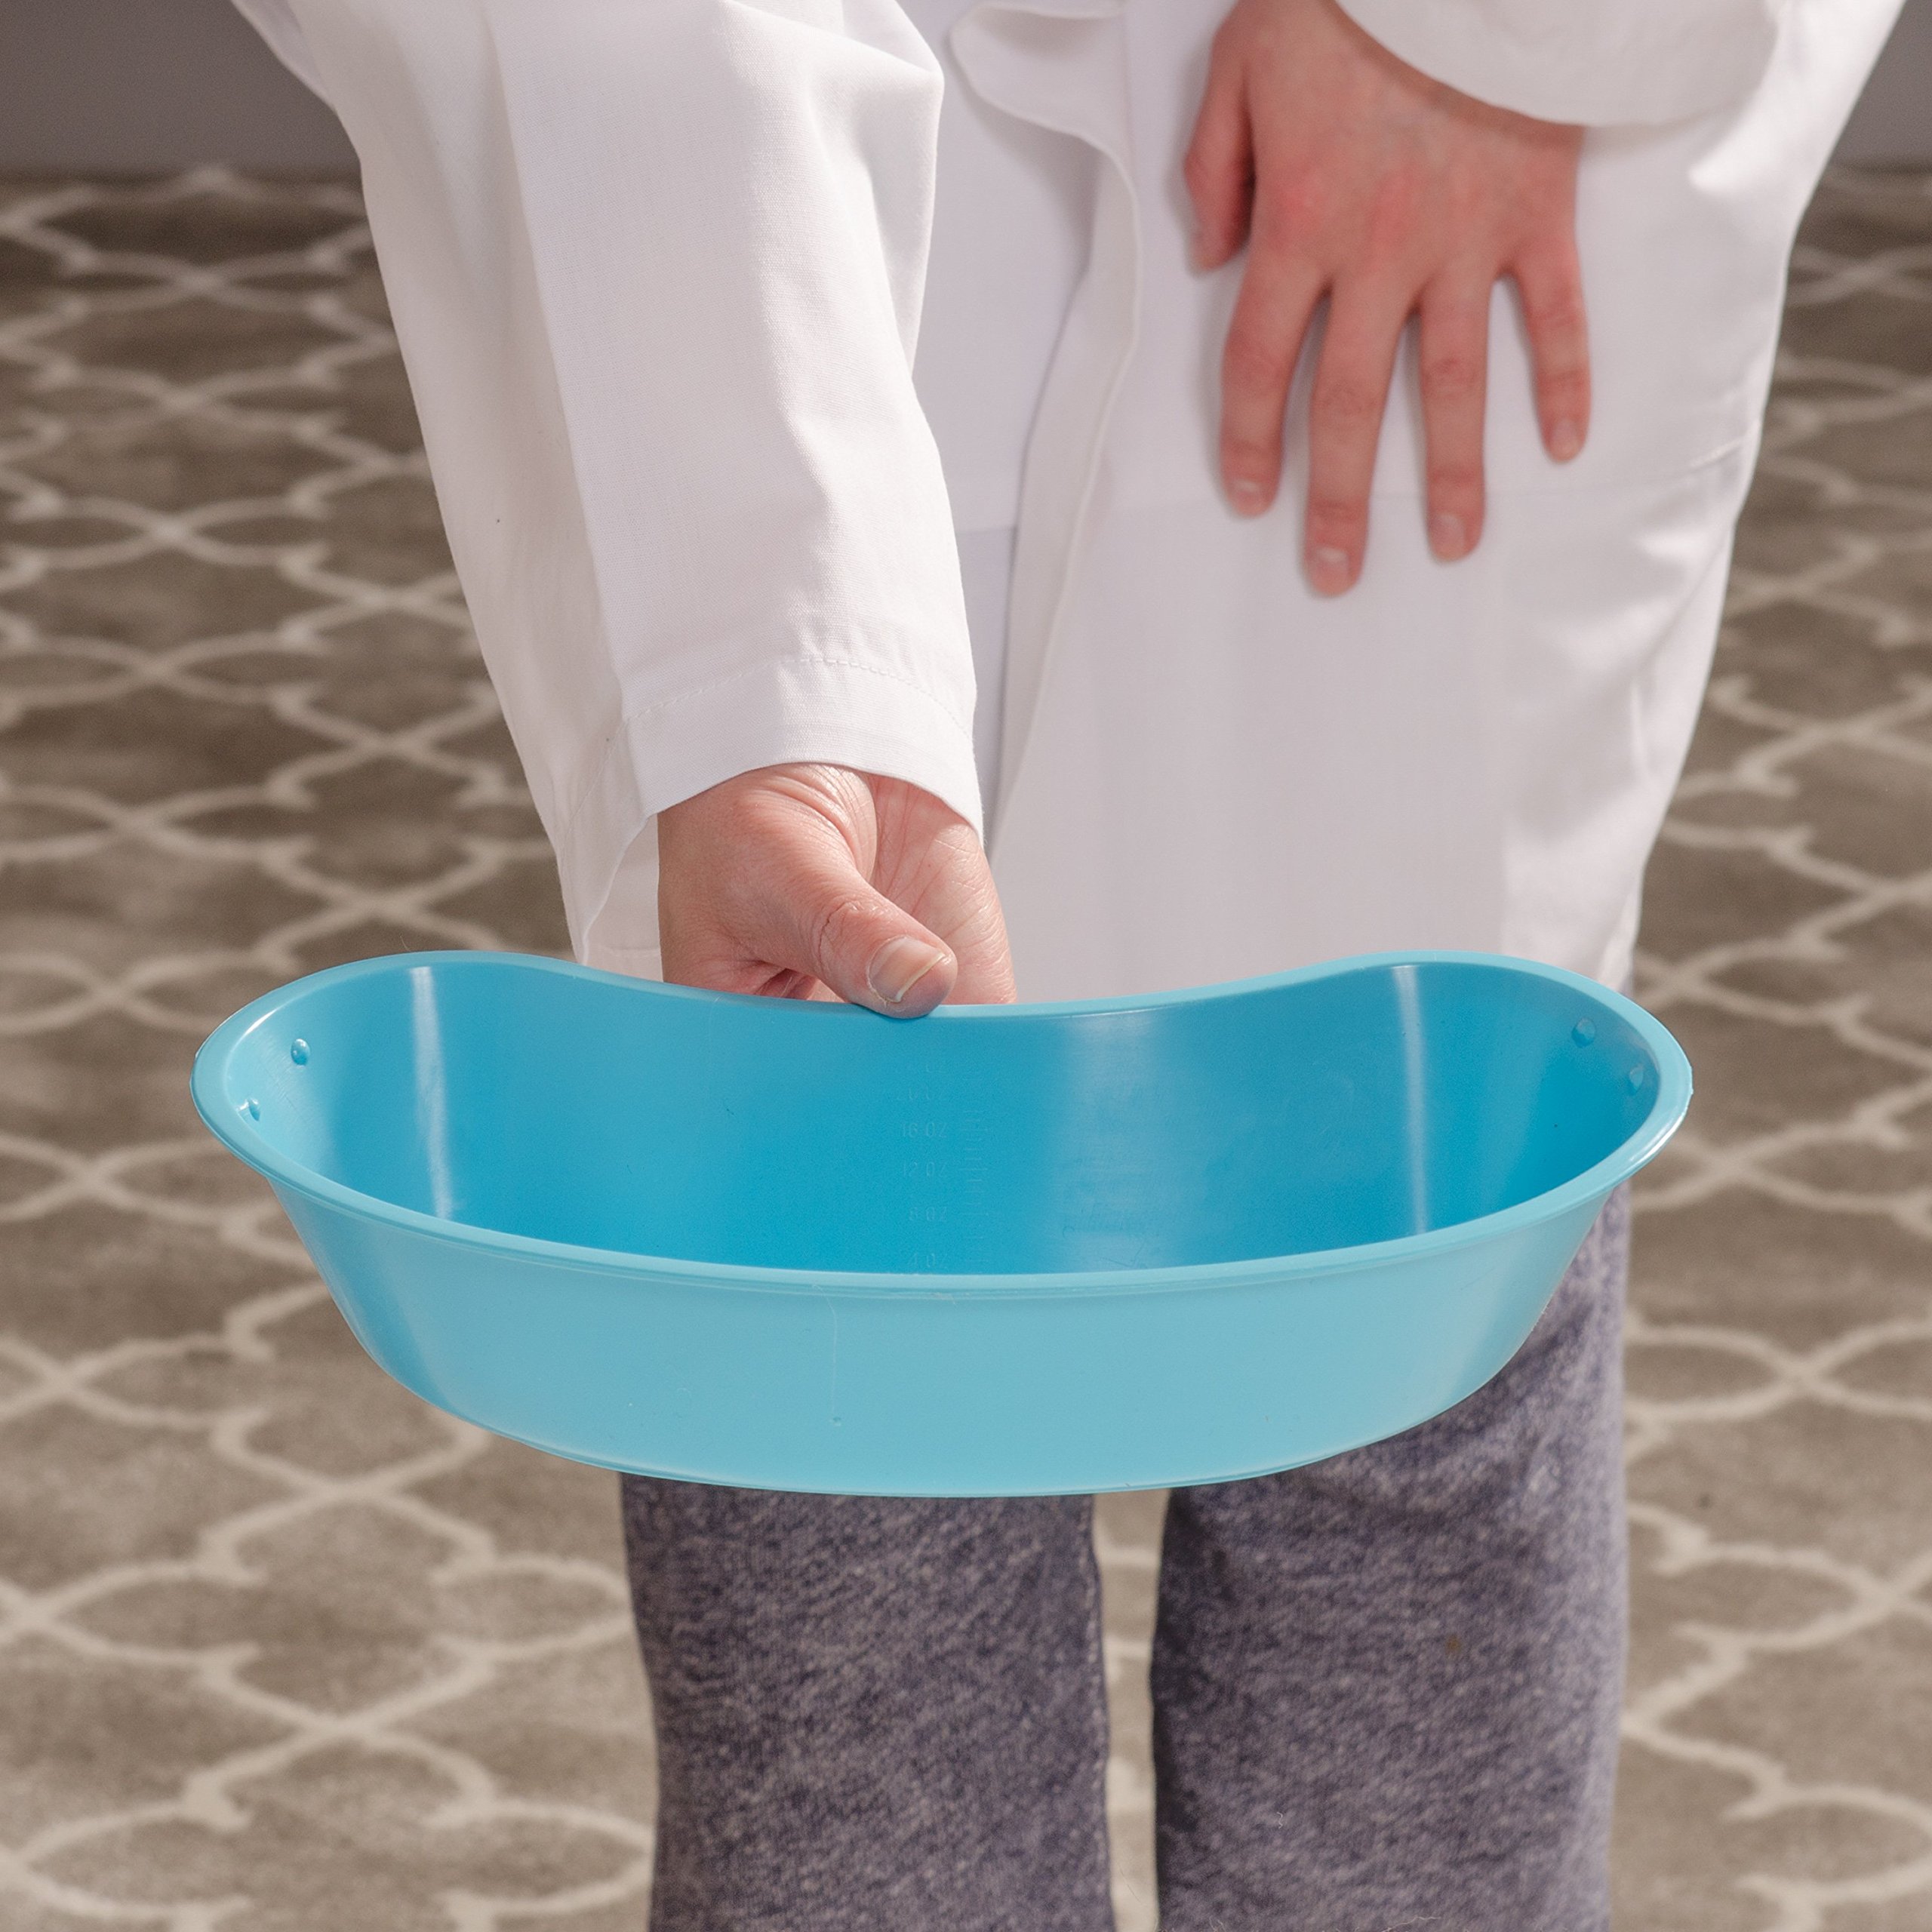 DMI Emesis Basin, Autoclavable, Kidney Shaped, Durable Design, Visual Measurements, Made in USA